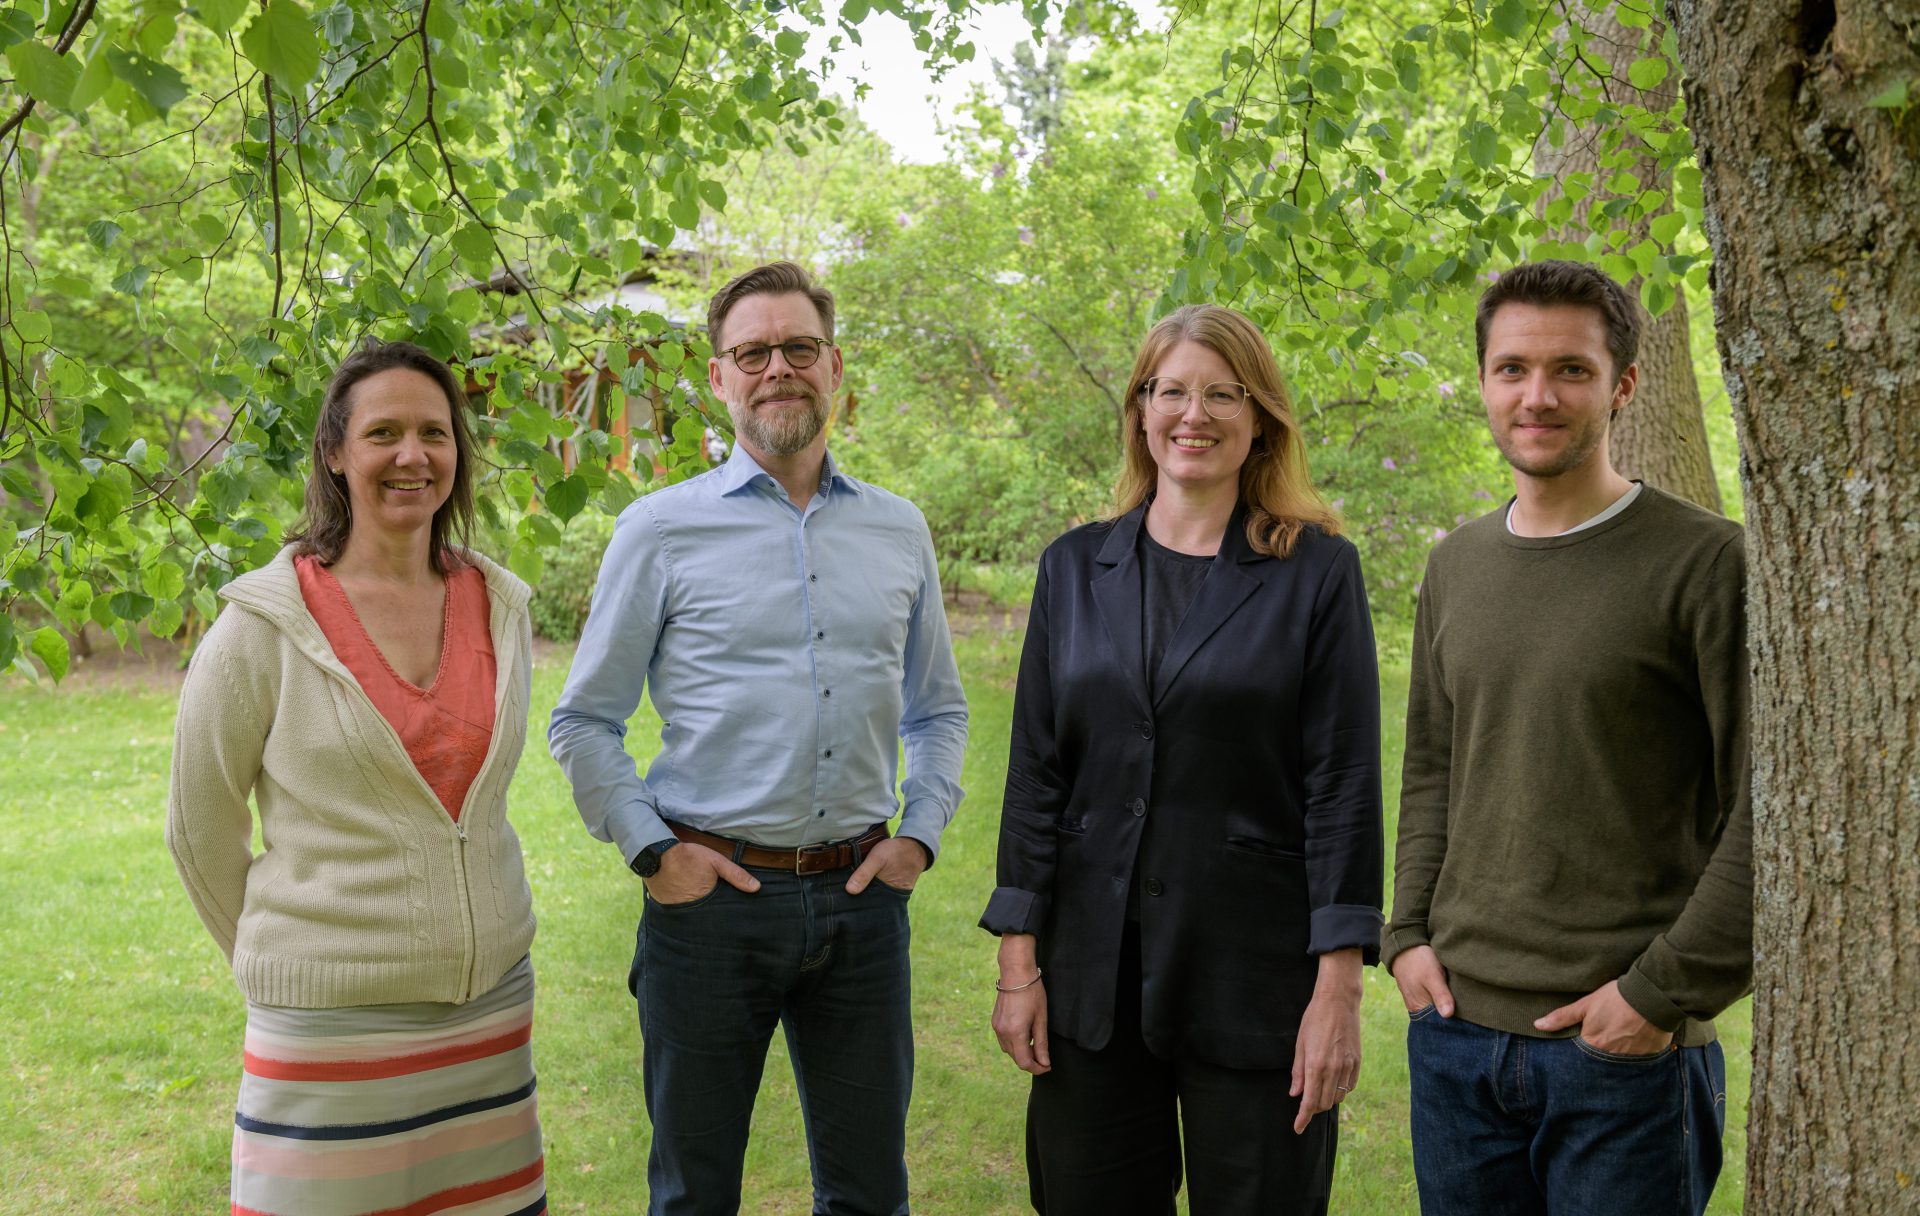 Dani Dani Gaillard-Picher, Thomas Rebermark, Malin Lundberg Ingemarsson and Ivan Sjögren, SIWI's International Policy team, standing outside with trees and grass in the background. They smile while looking at the camera.